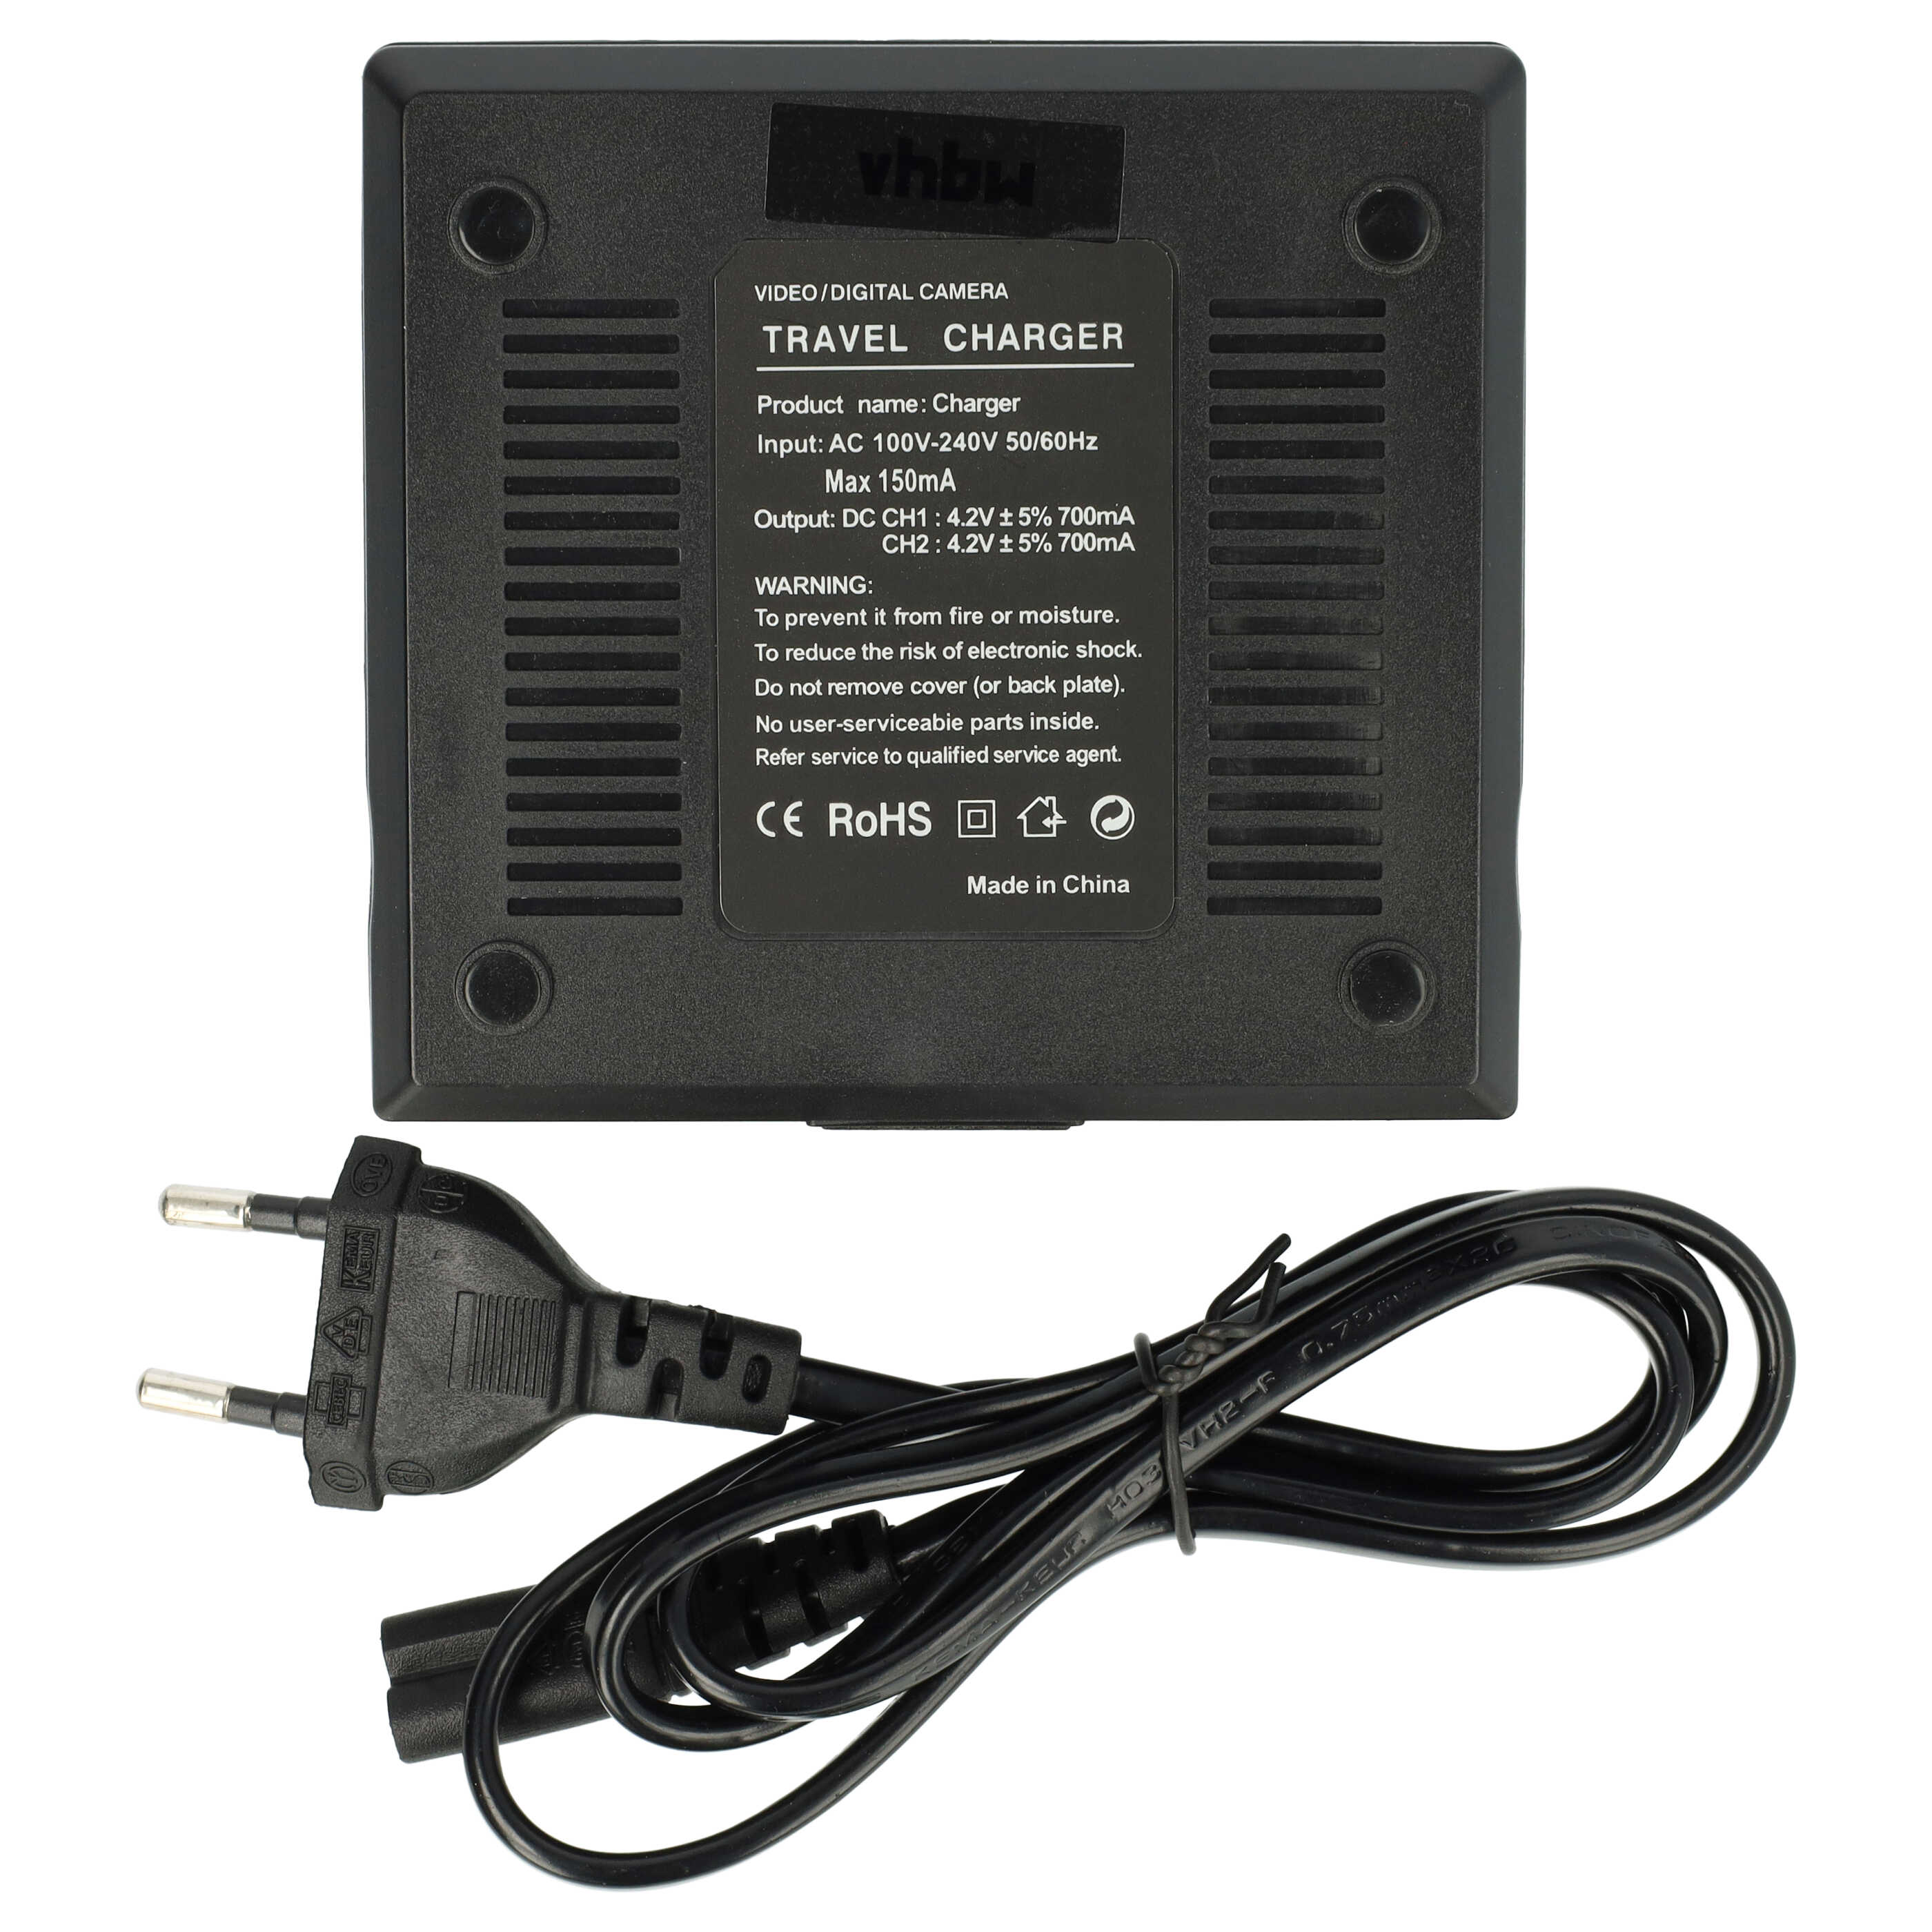 Battery Charger suitable for Everio BN-VG107E Camera etc. - 0.5 / 0.9 A, 4.2/8.4 V